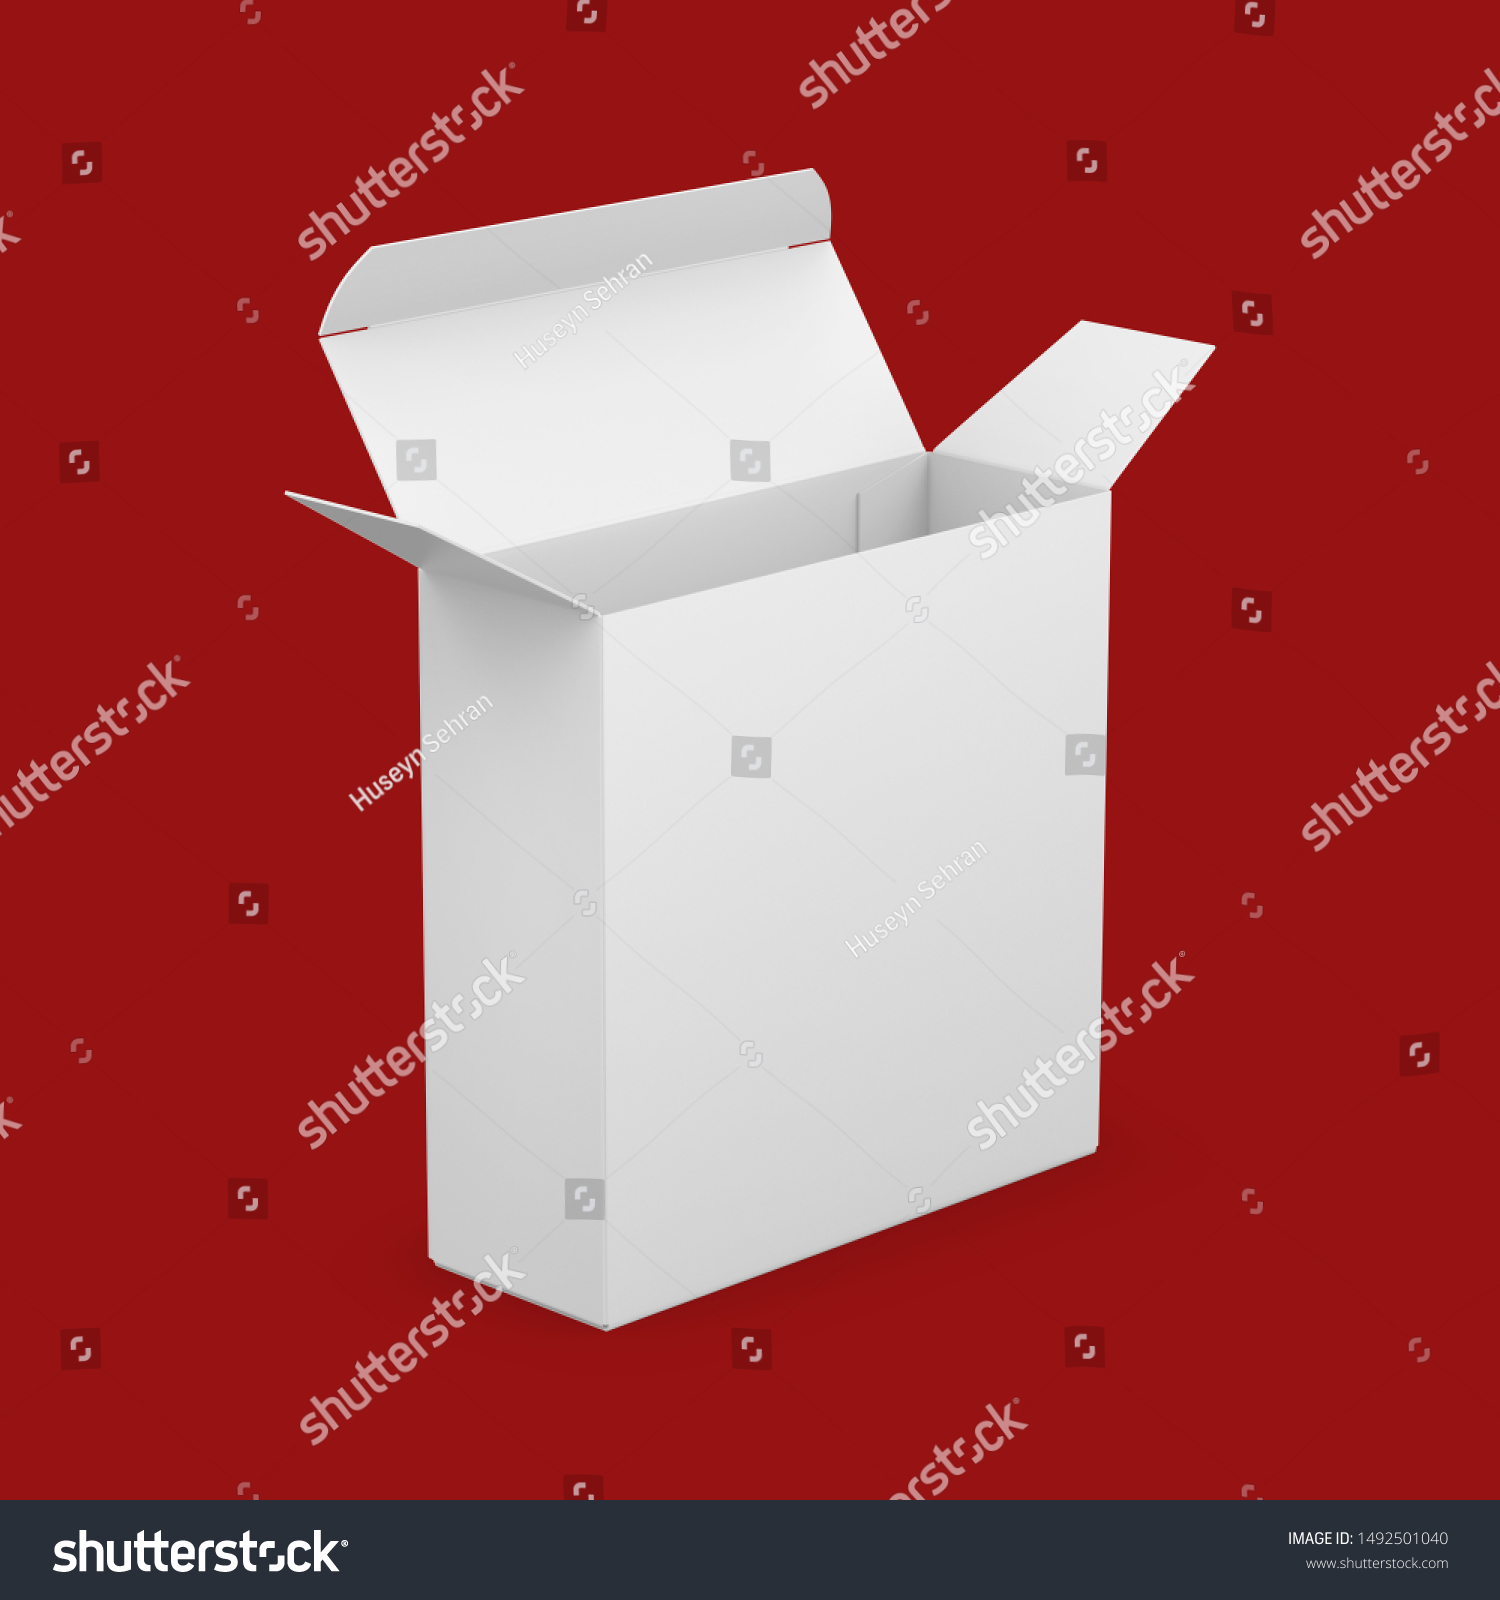 Yellowimages Images Stock Photos Vectors Shutterstock